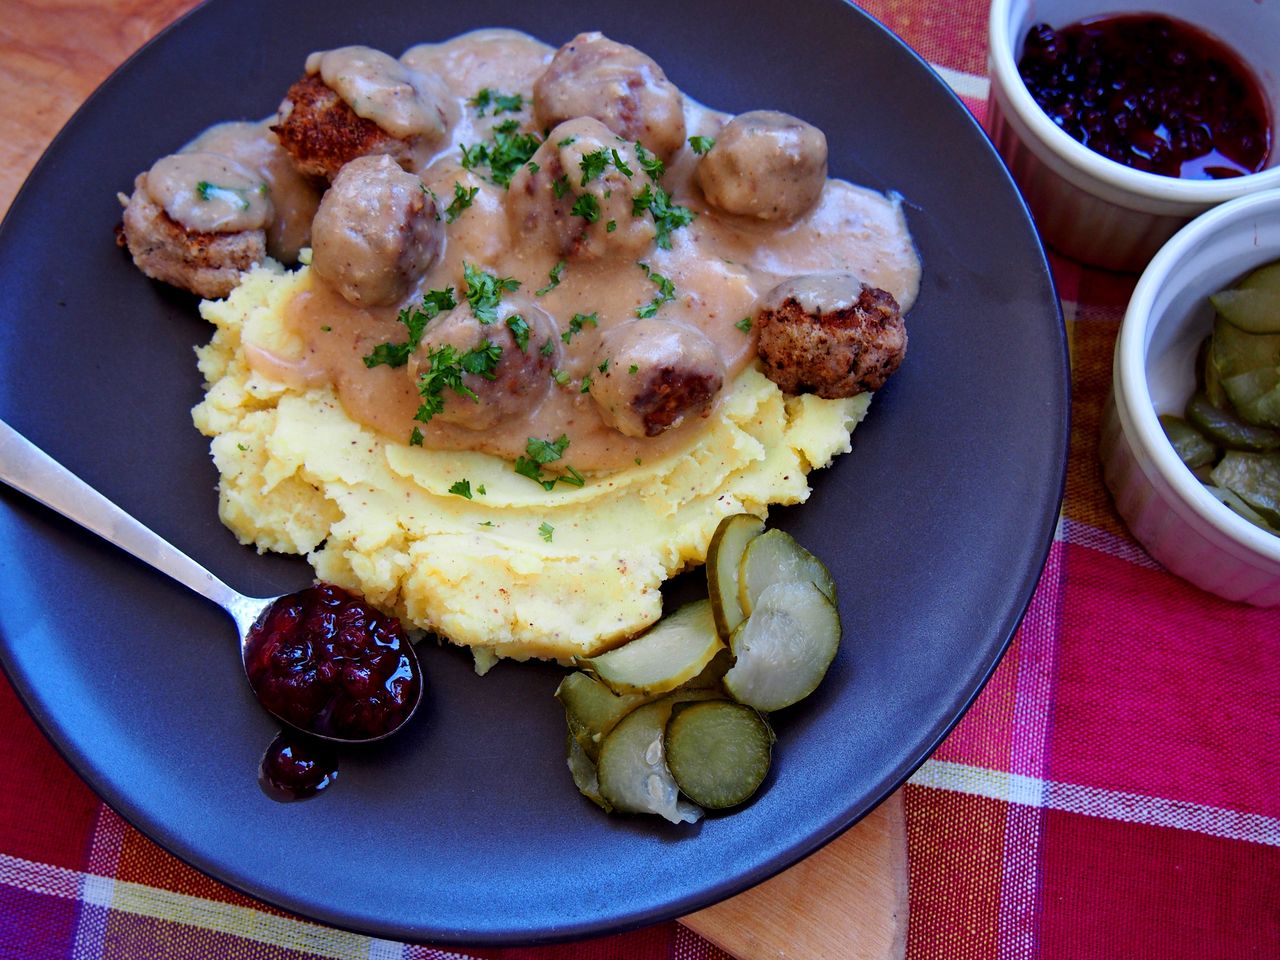 Discover the secret to homemade Swedish meatballs that beat IKEA's